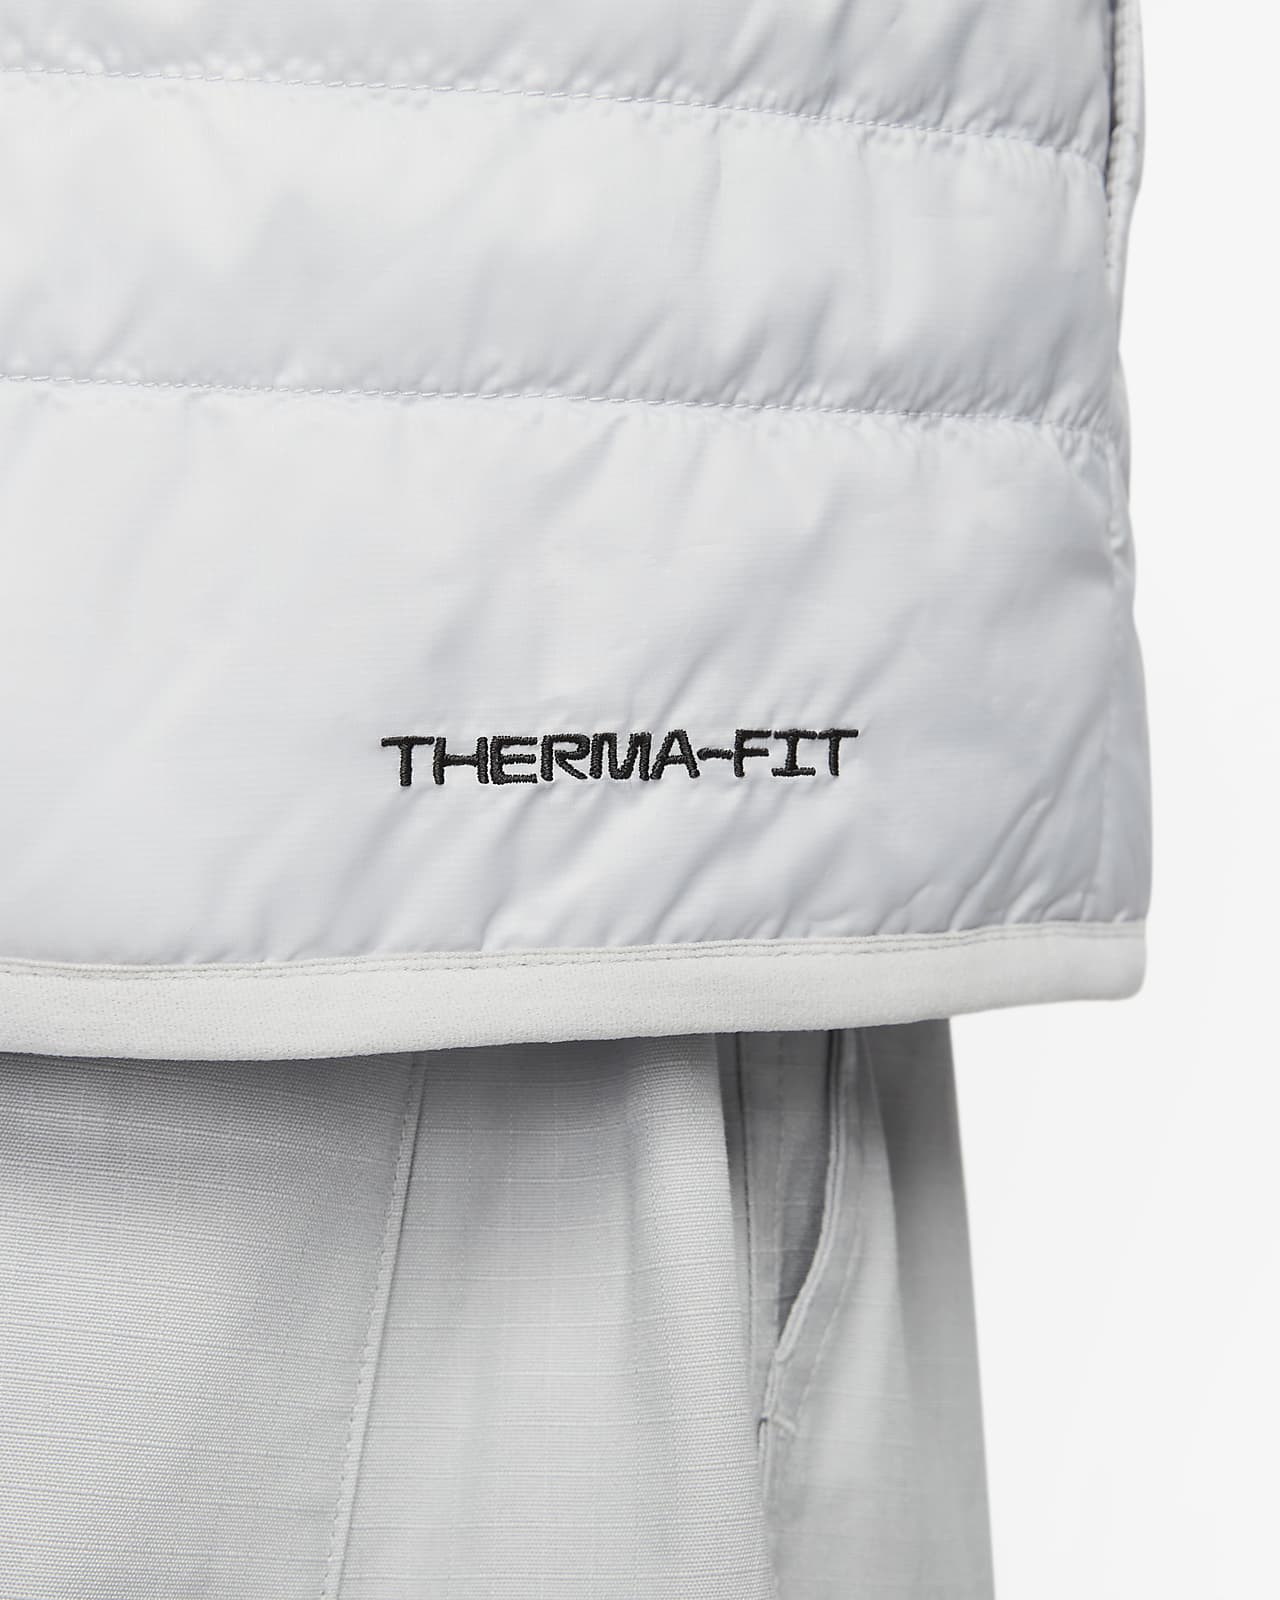 Nike Therma-FIT Windrunner Men's Midweight Puffer Vest.